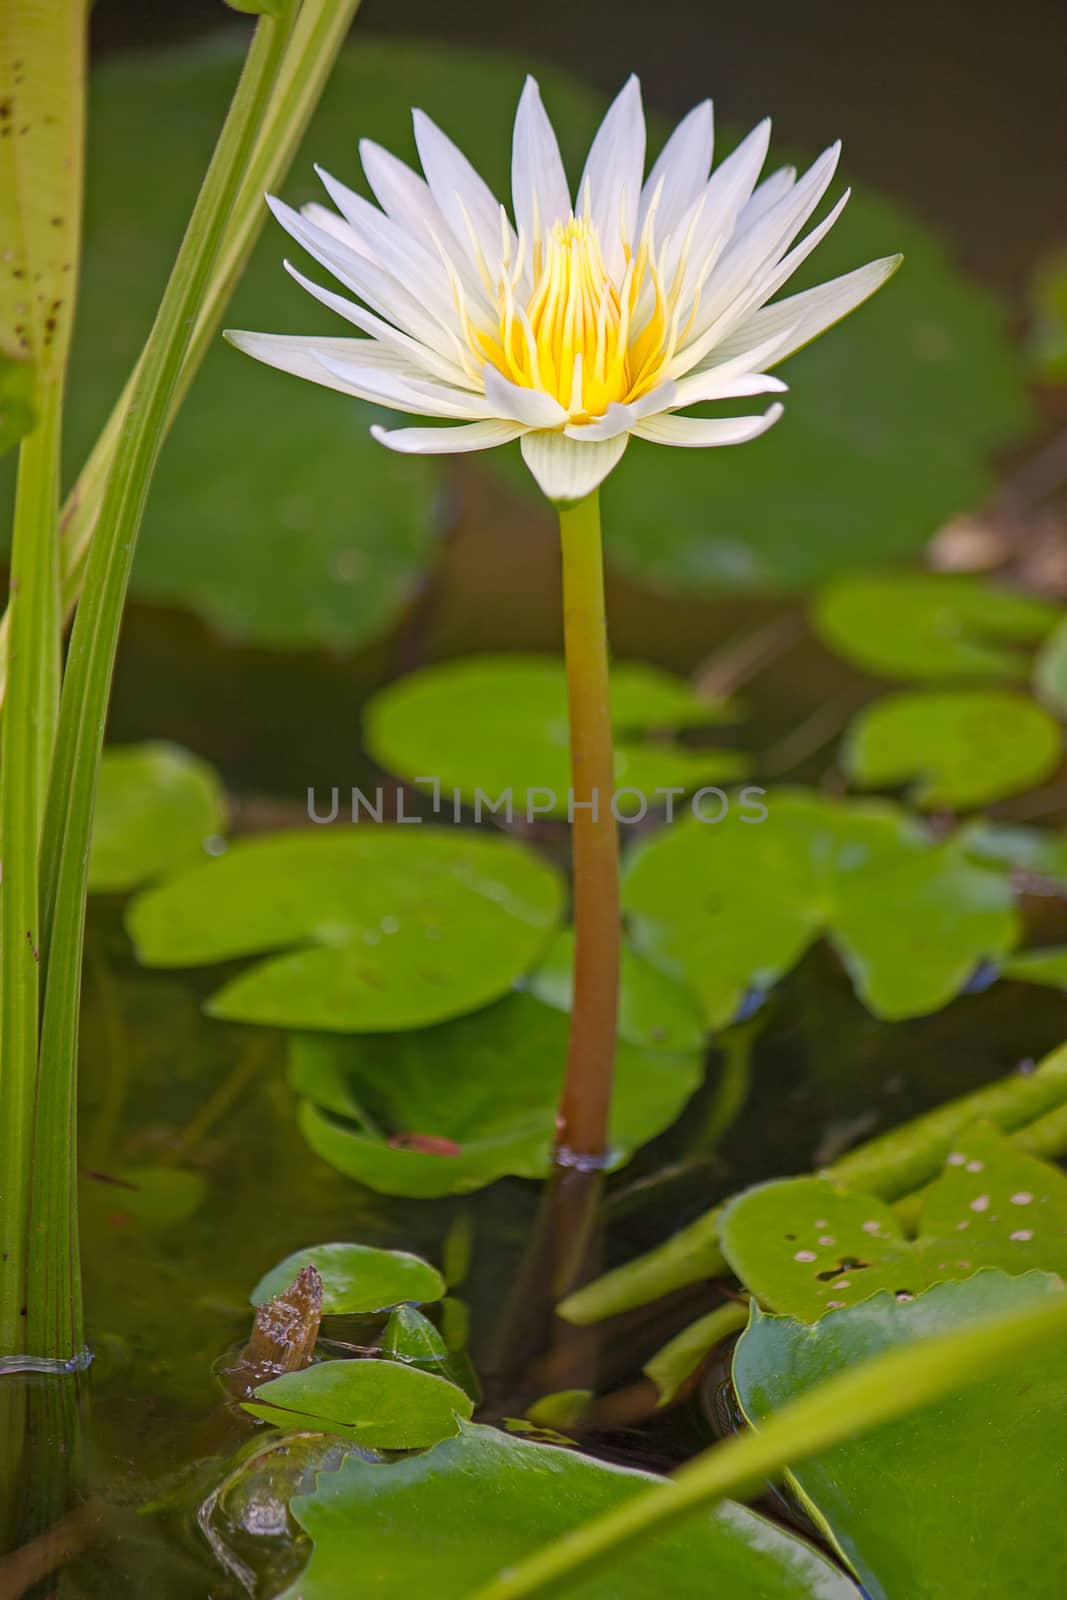 A white water lily sticking out of the water on a background of leaves.